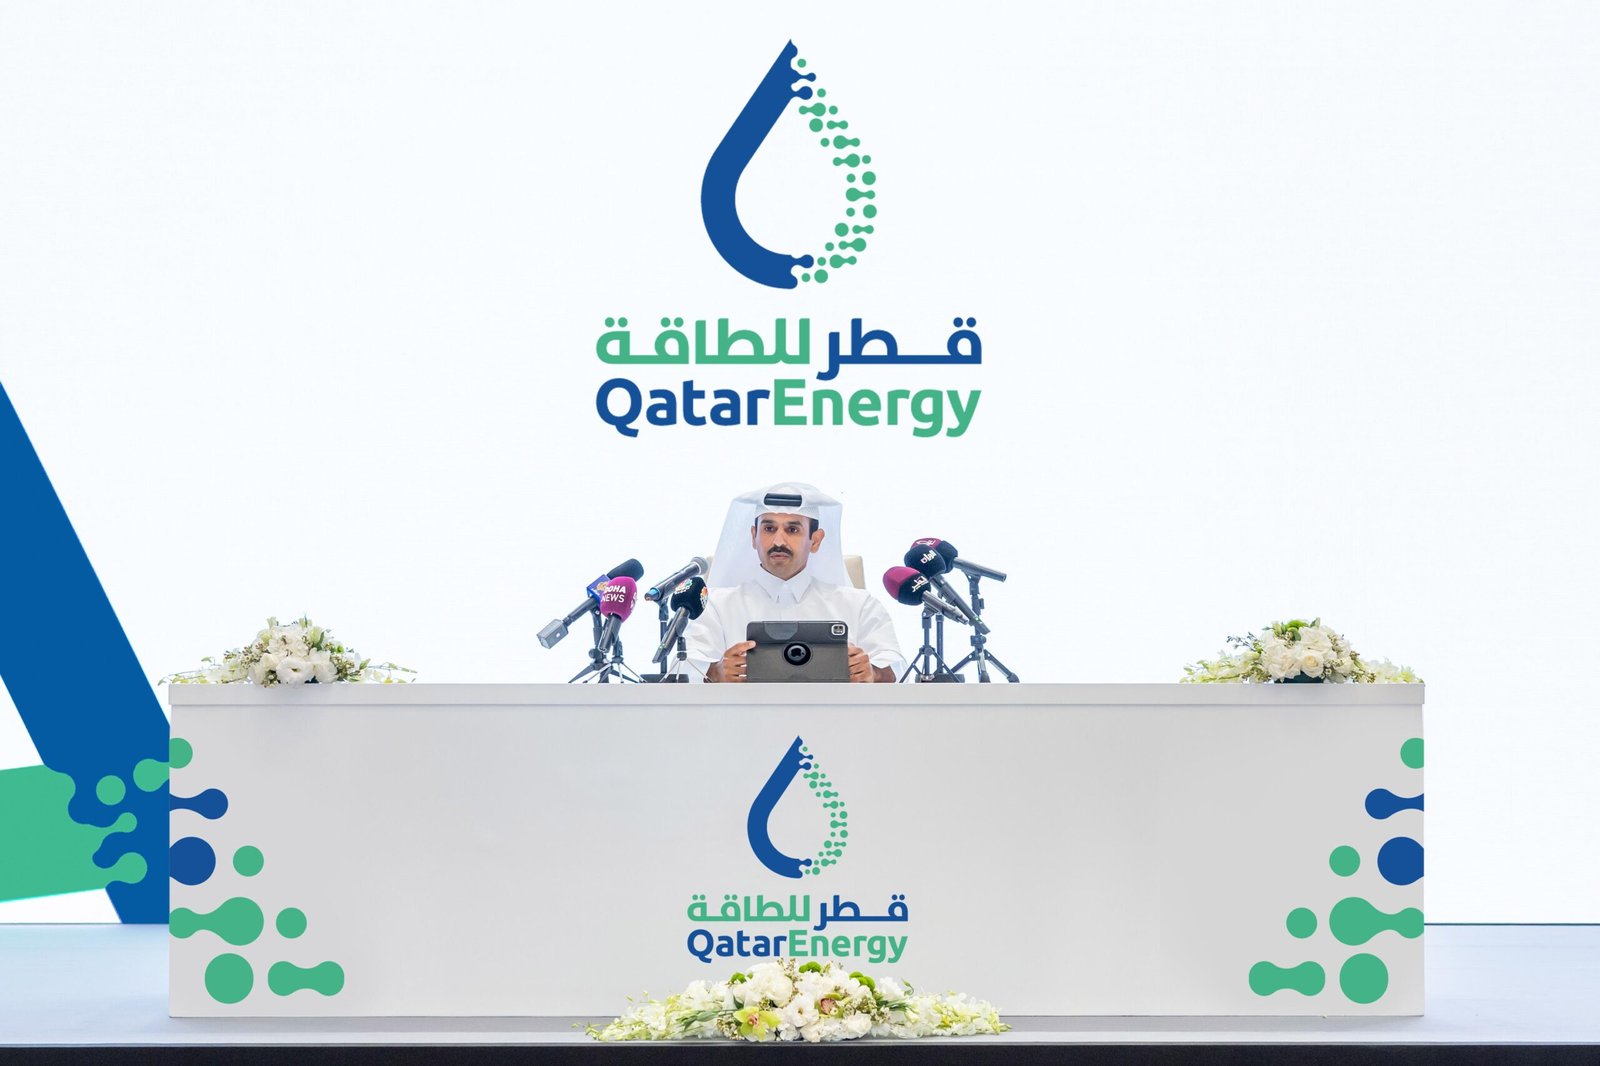 Qatar Announces Raising Qatar’s LNG Production Capacity to 142 MTPA By End of 2030